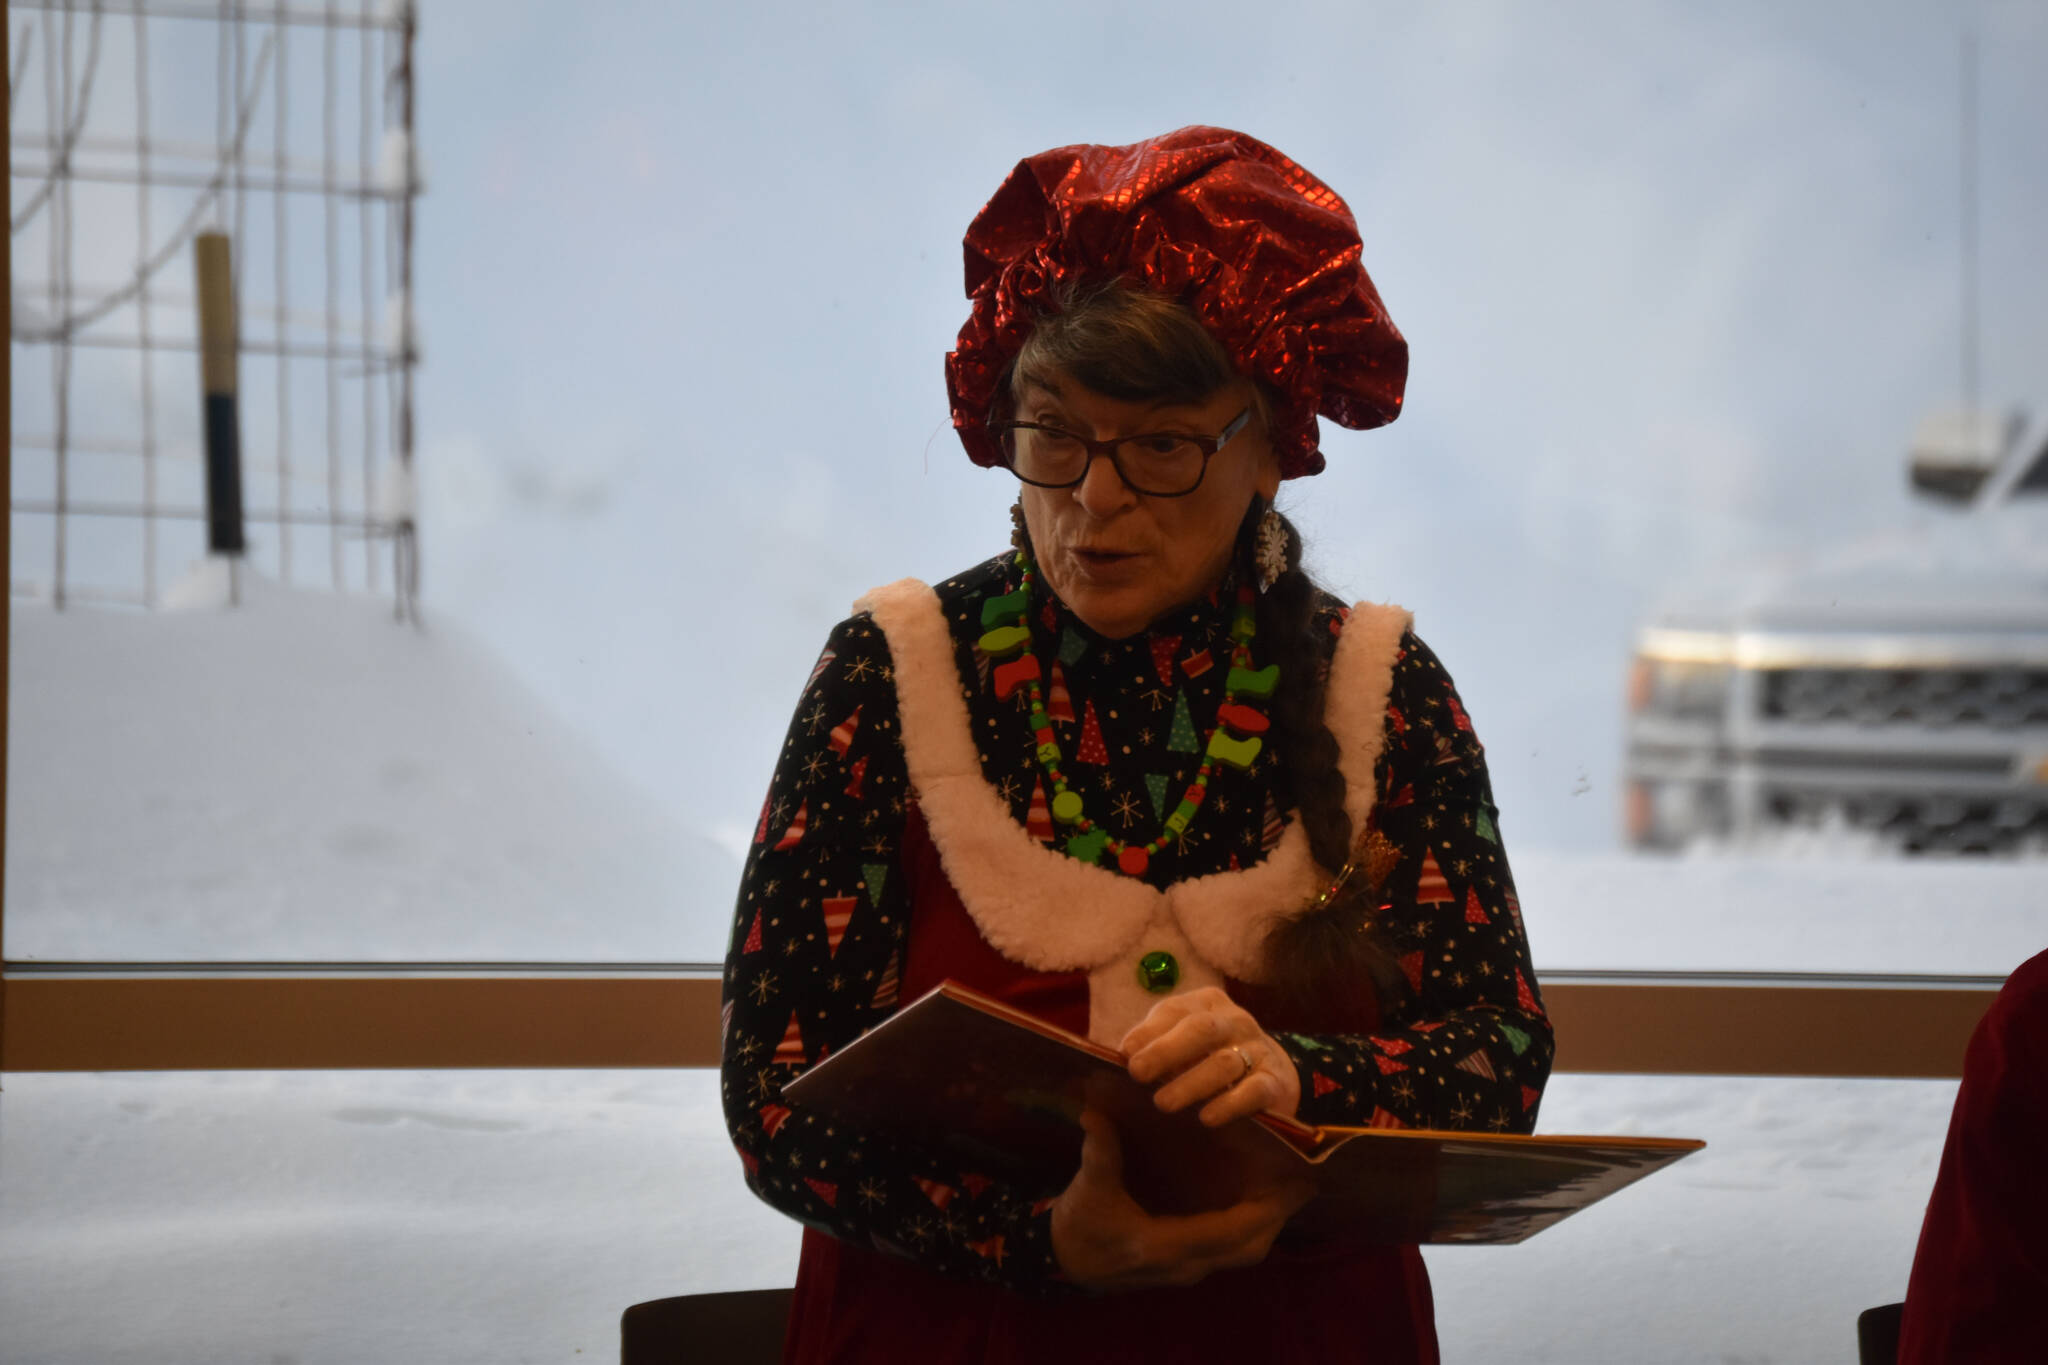 Mrs. Claus, played by Kit Hill, reads to the children during Story Time with Mrs. Claus at the Kenai Community Library in Kenai, Alaska, on Monday, Dec. 19, 2022. (Jake Dye/Peninsula Clarion)